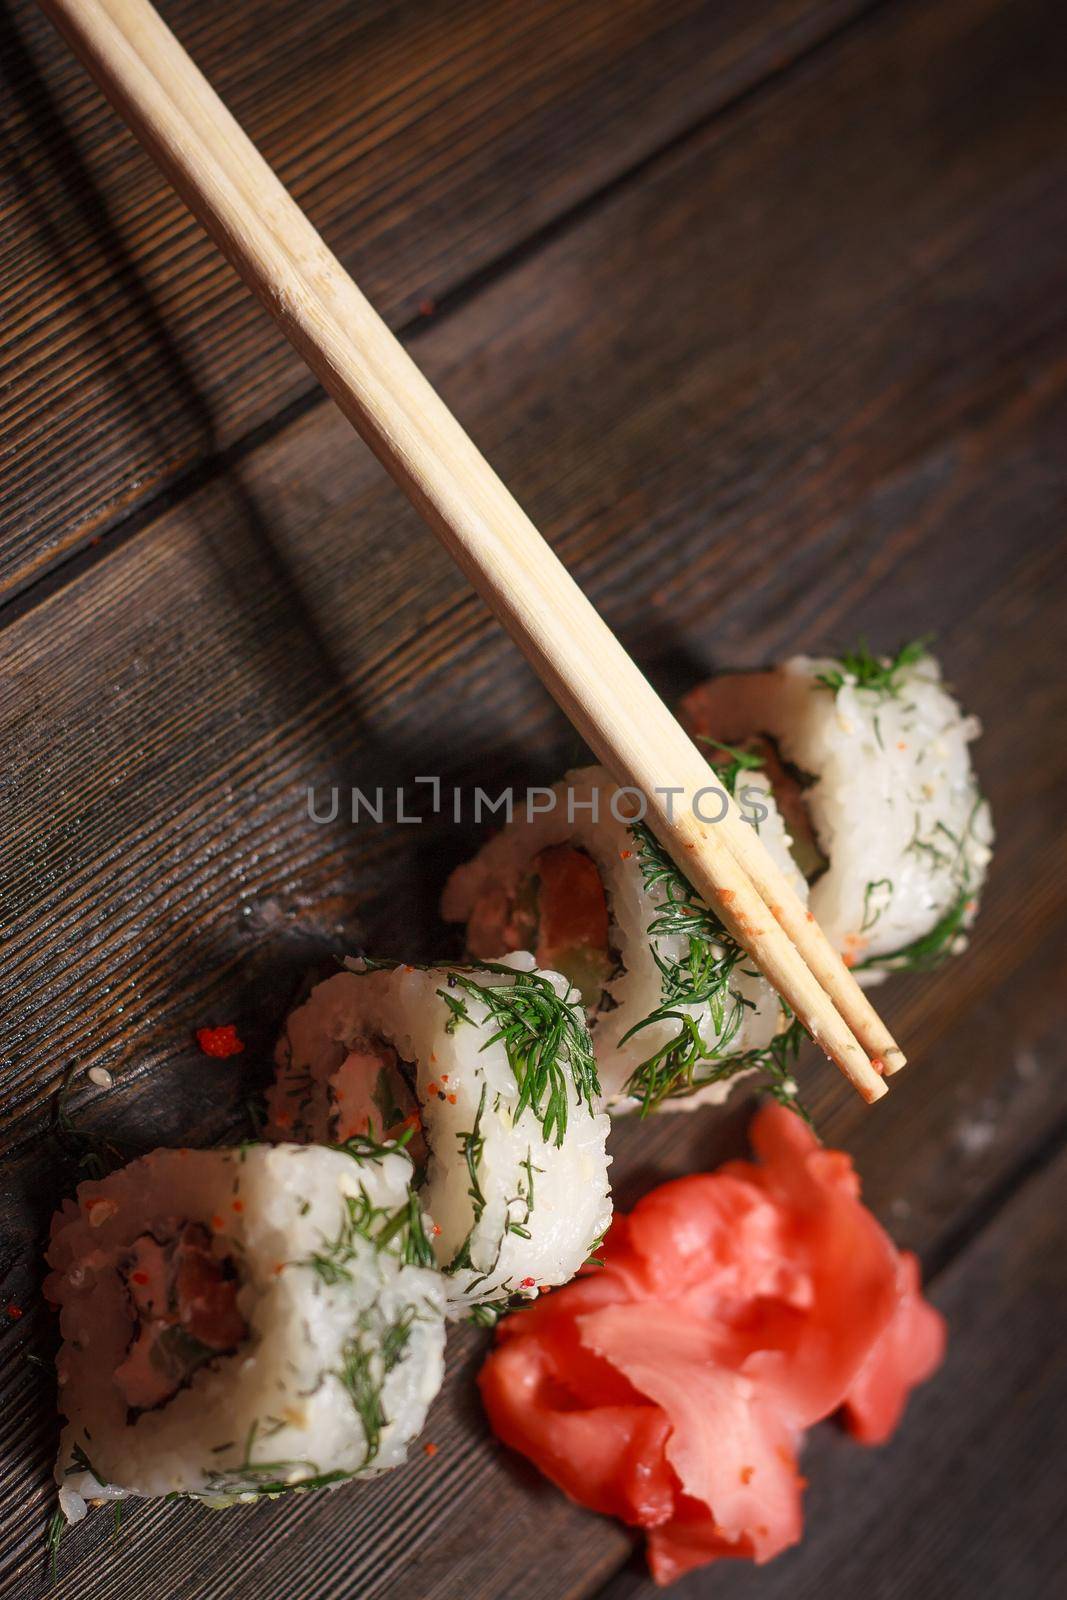 rolls red ginger food delivery japanese restaurant gourmet wooden table by SHOTPRIME